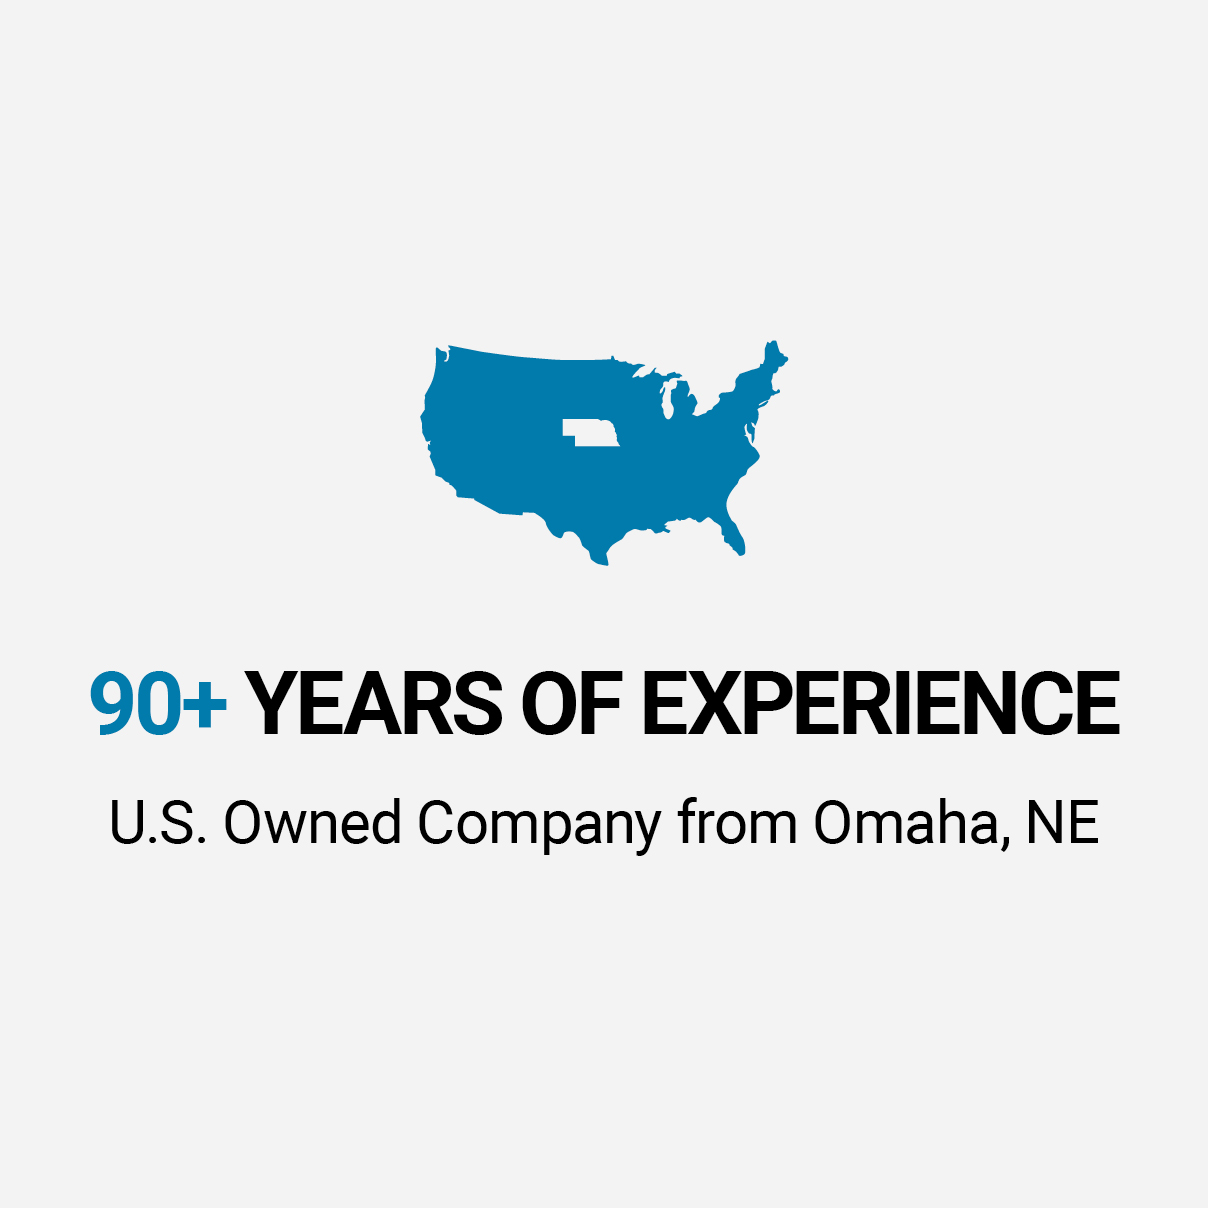 90+ Years of Experience